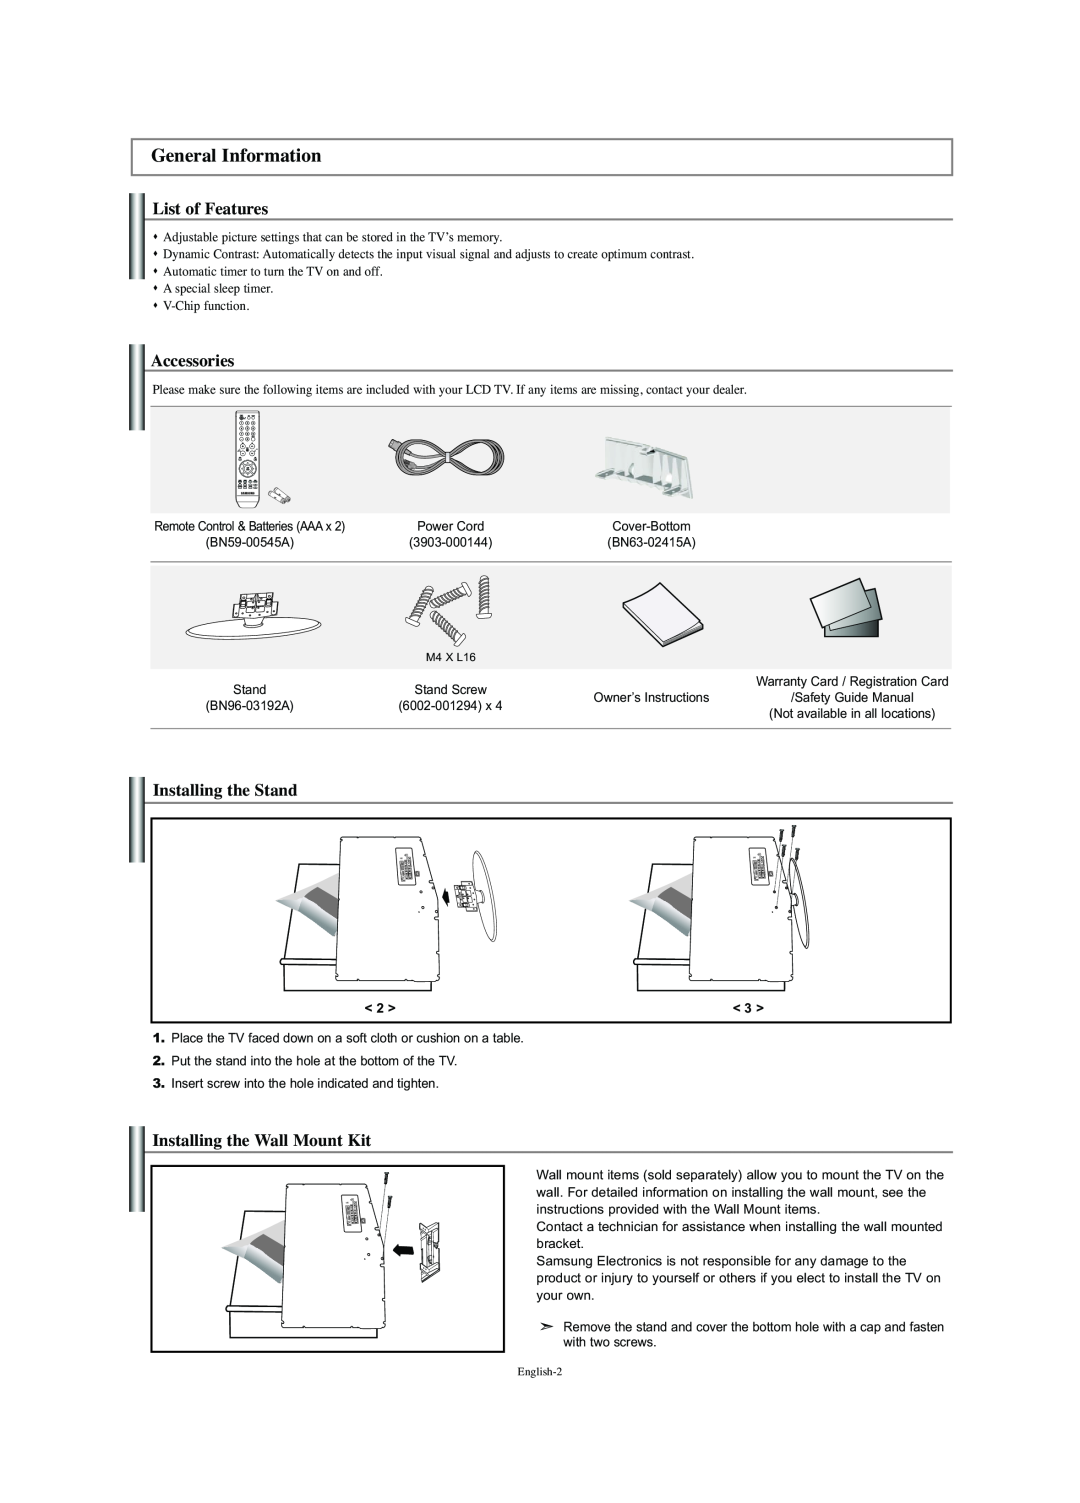 Samsung LN-S2341W General Information, List of Features, Accessories, Installing the Stand, Installing the Wall Mount Kit 